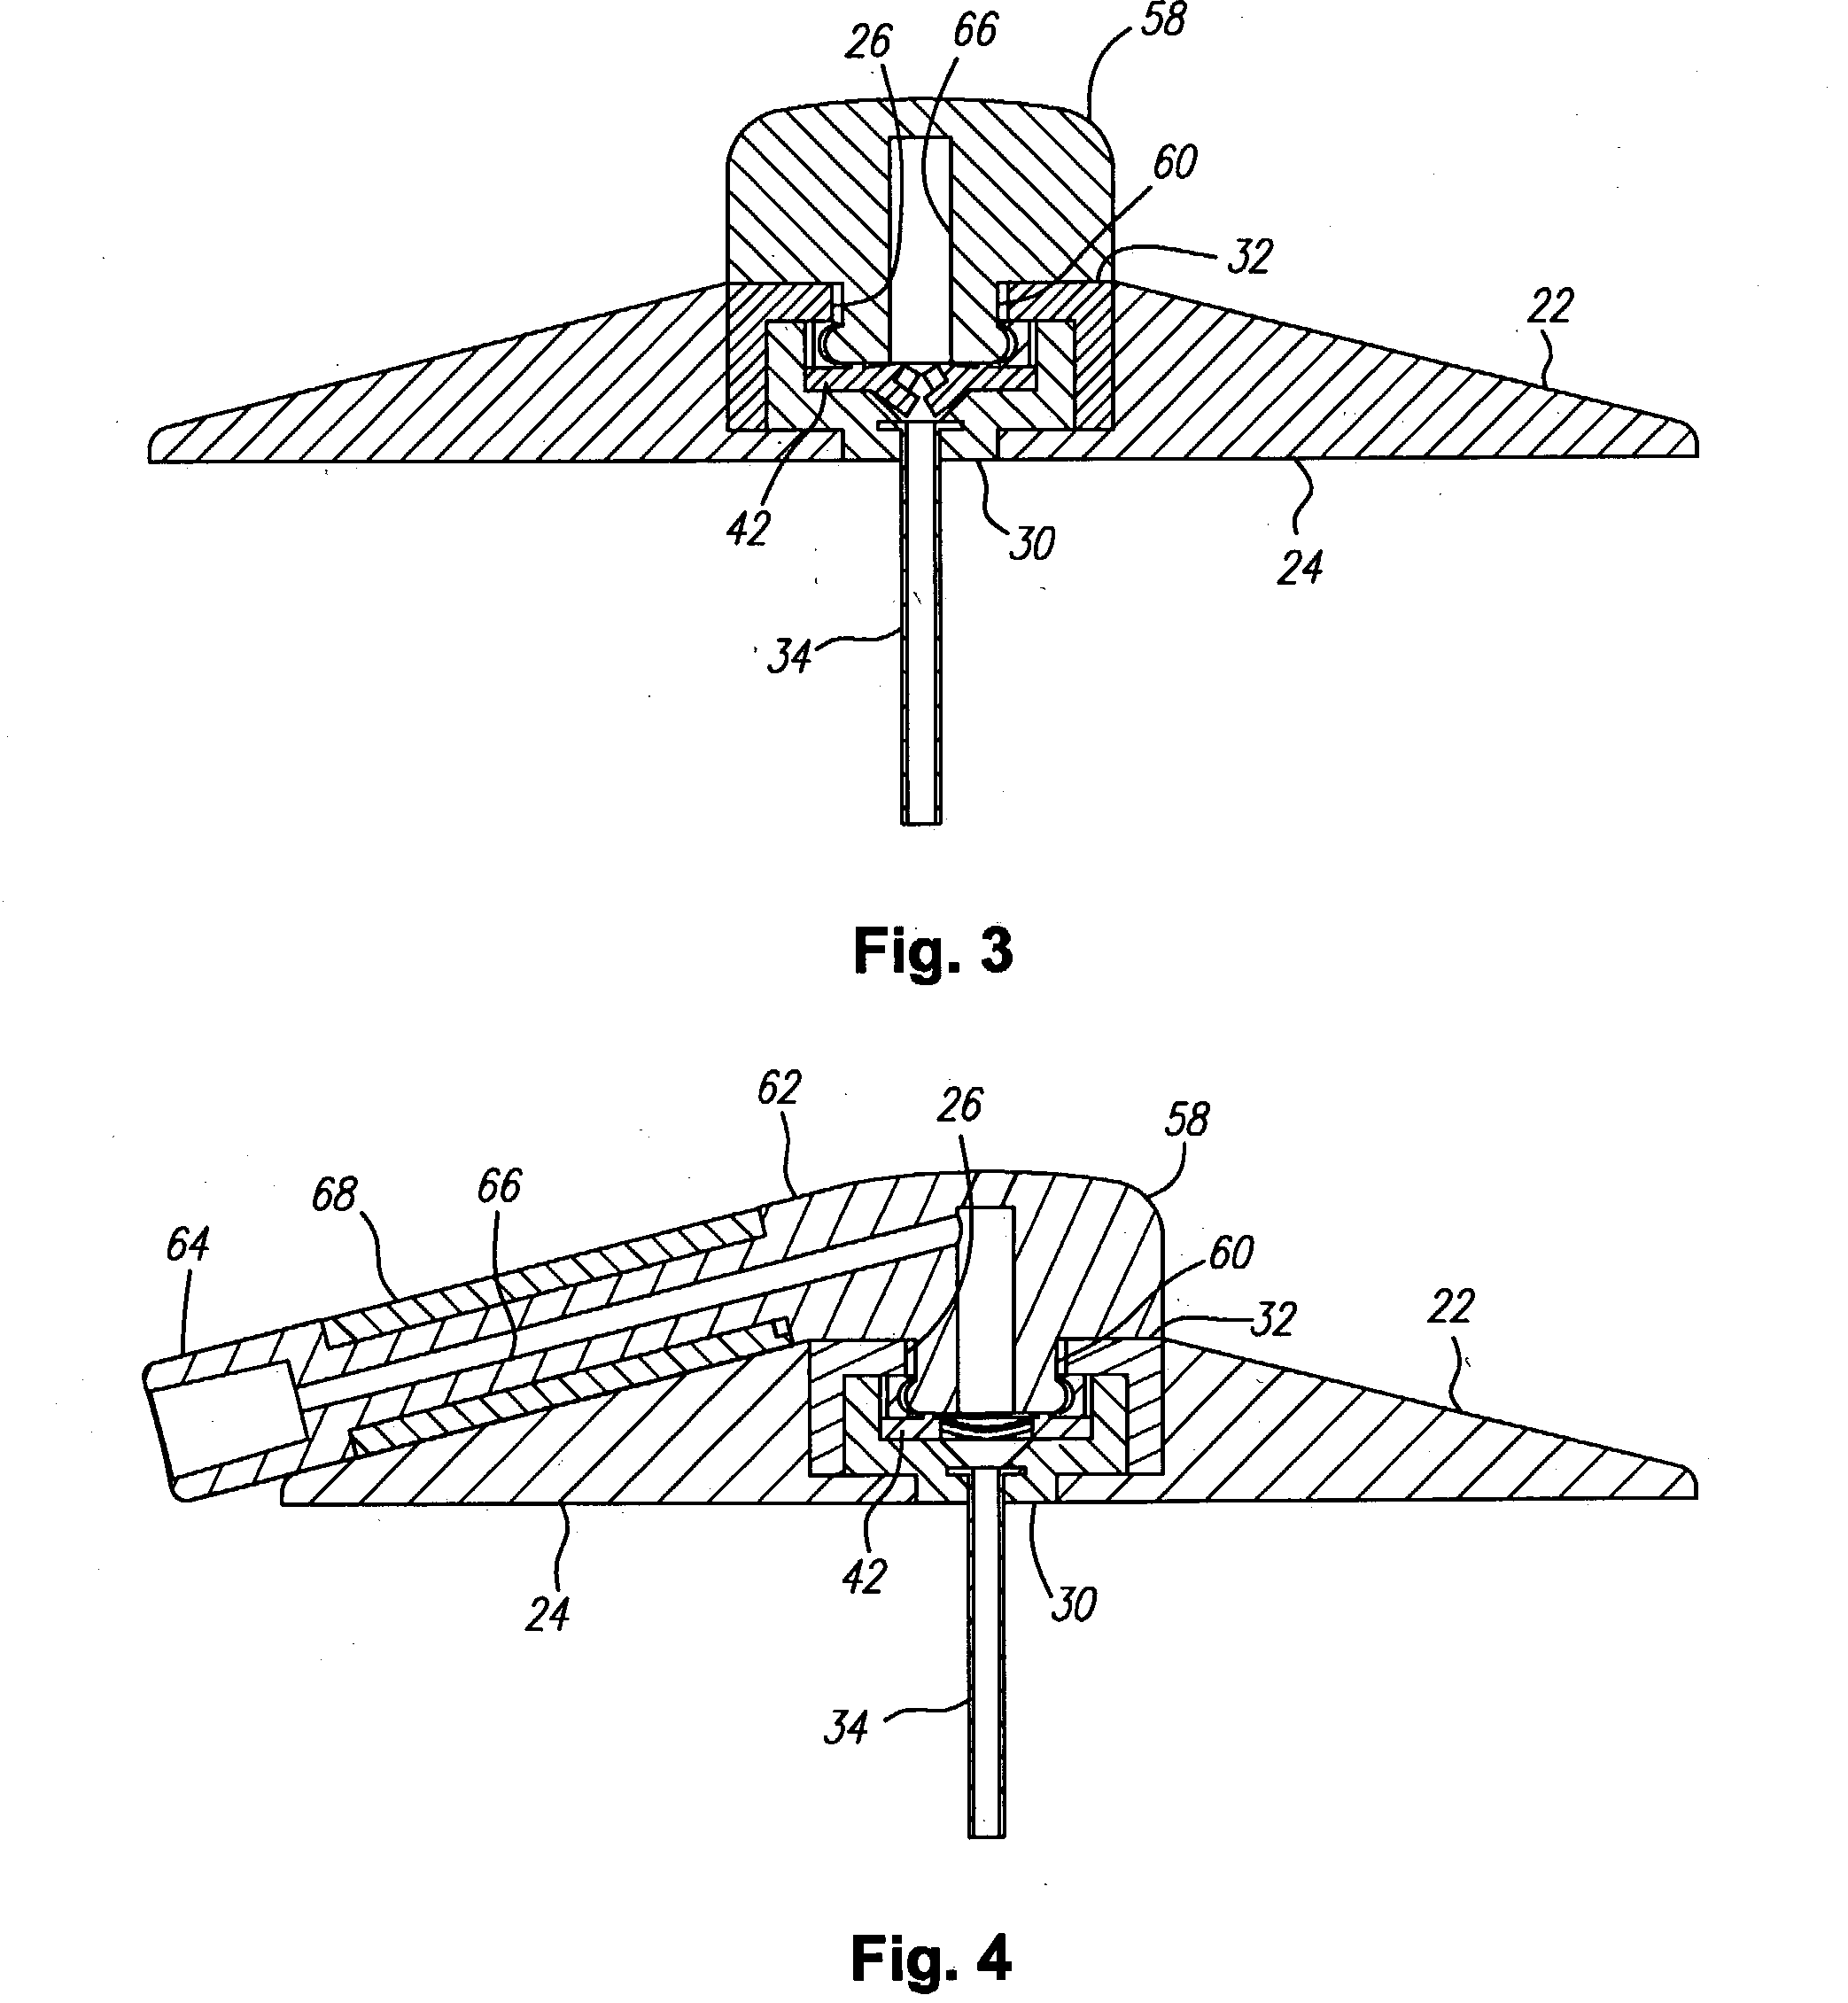 Apparatus and method for delivery of therapeutic and/or diagnostic agents